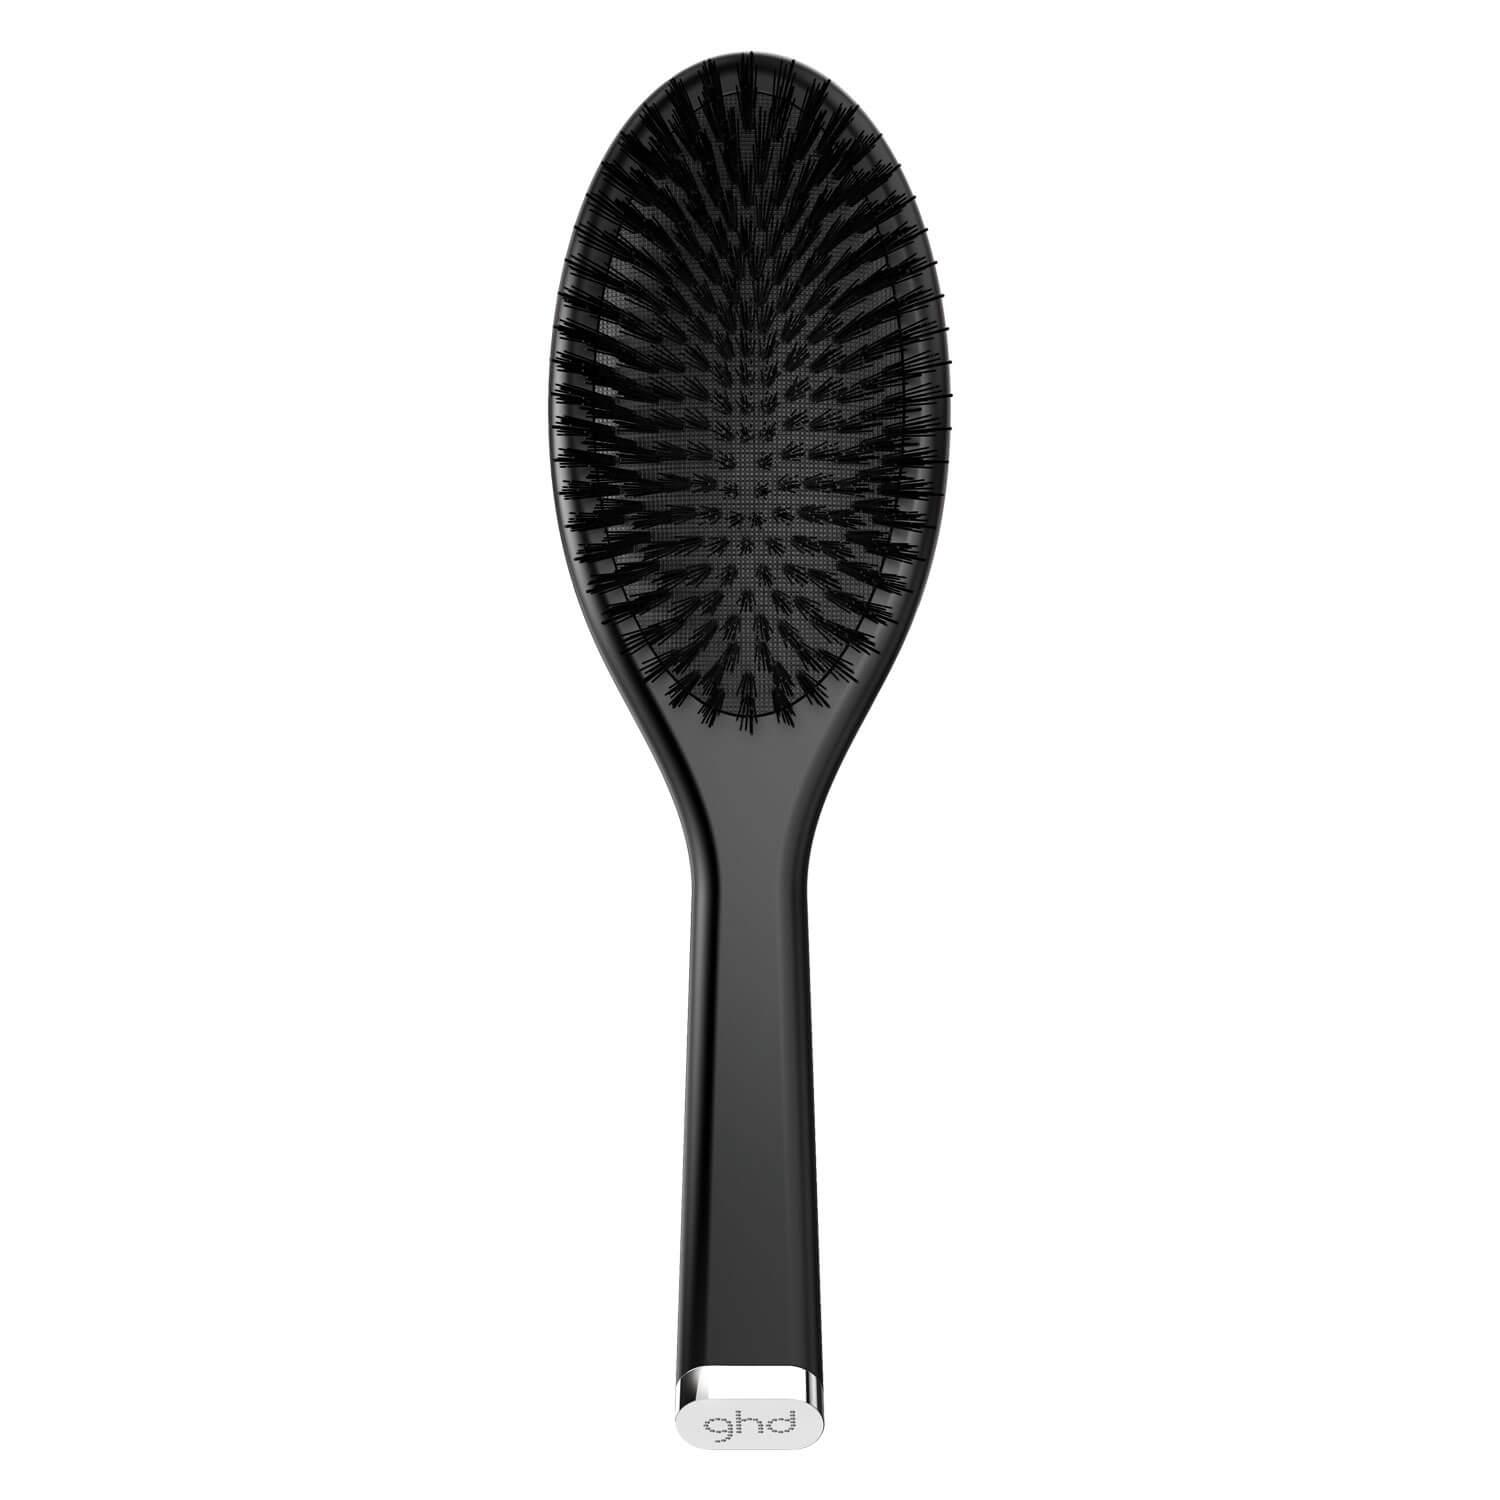 ghd Brushes - The Dresser Oval Brush